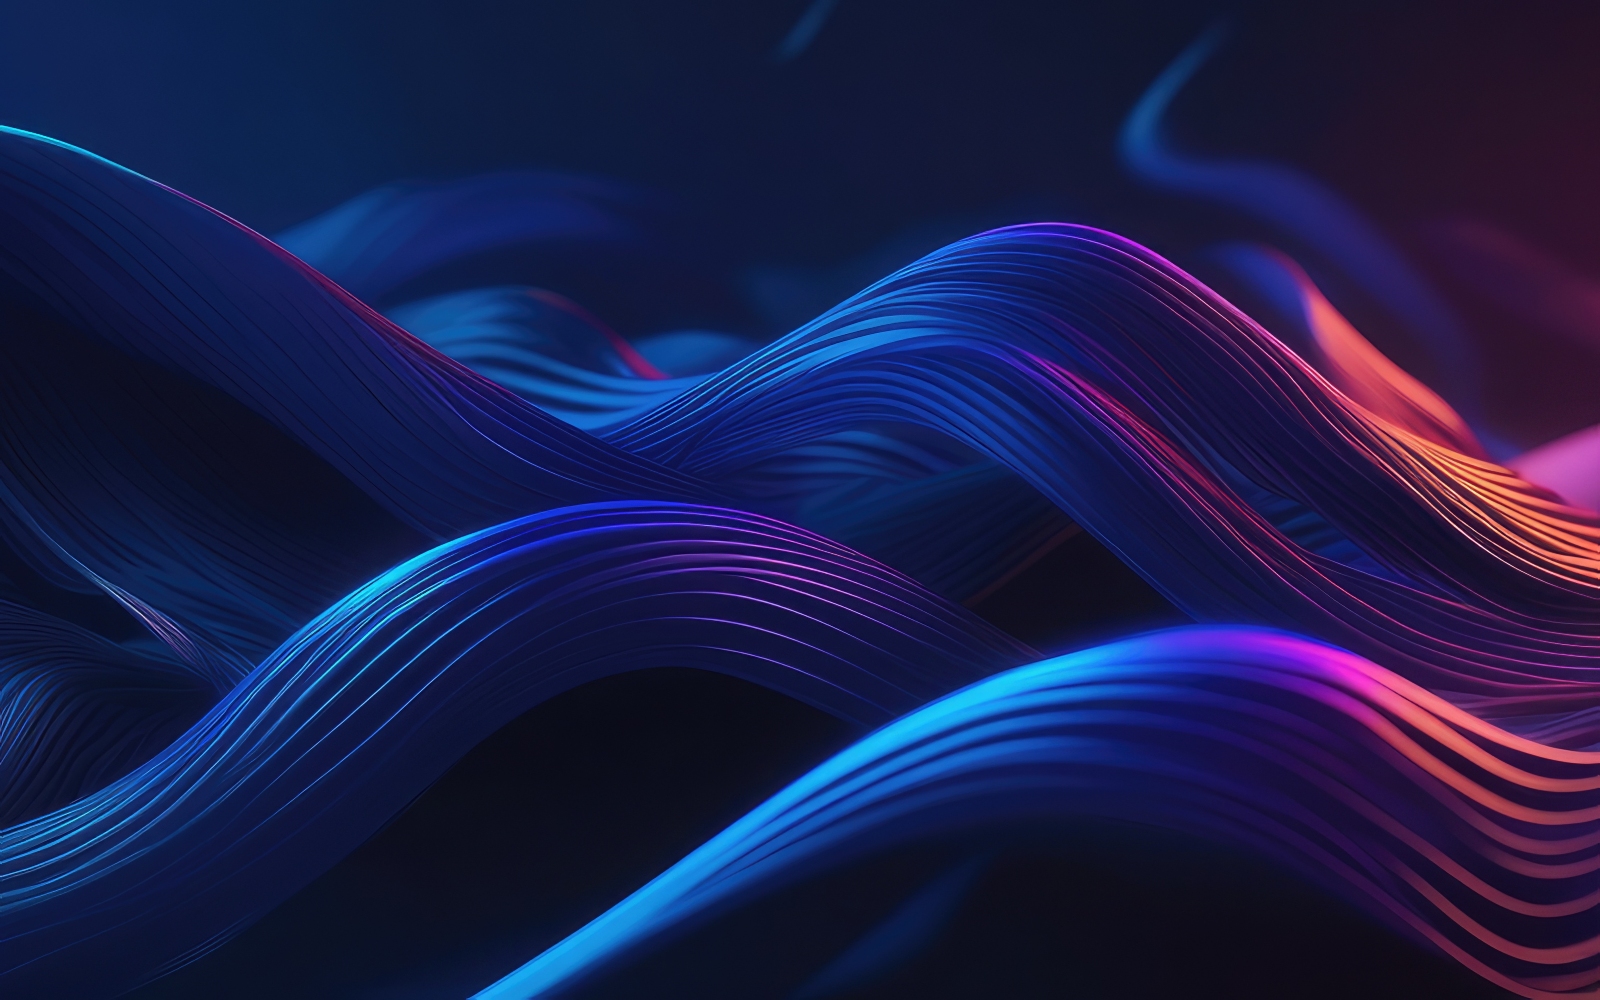 Premium Abstract 3D Technology Background design